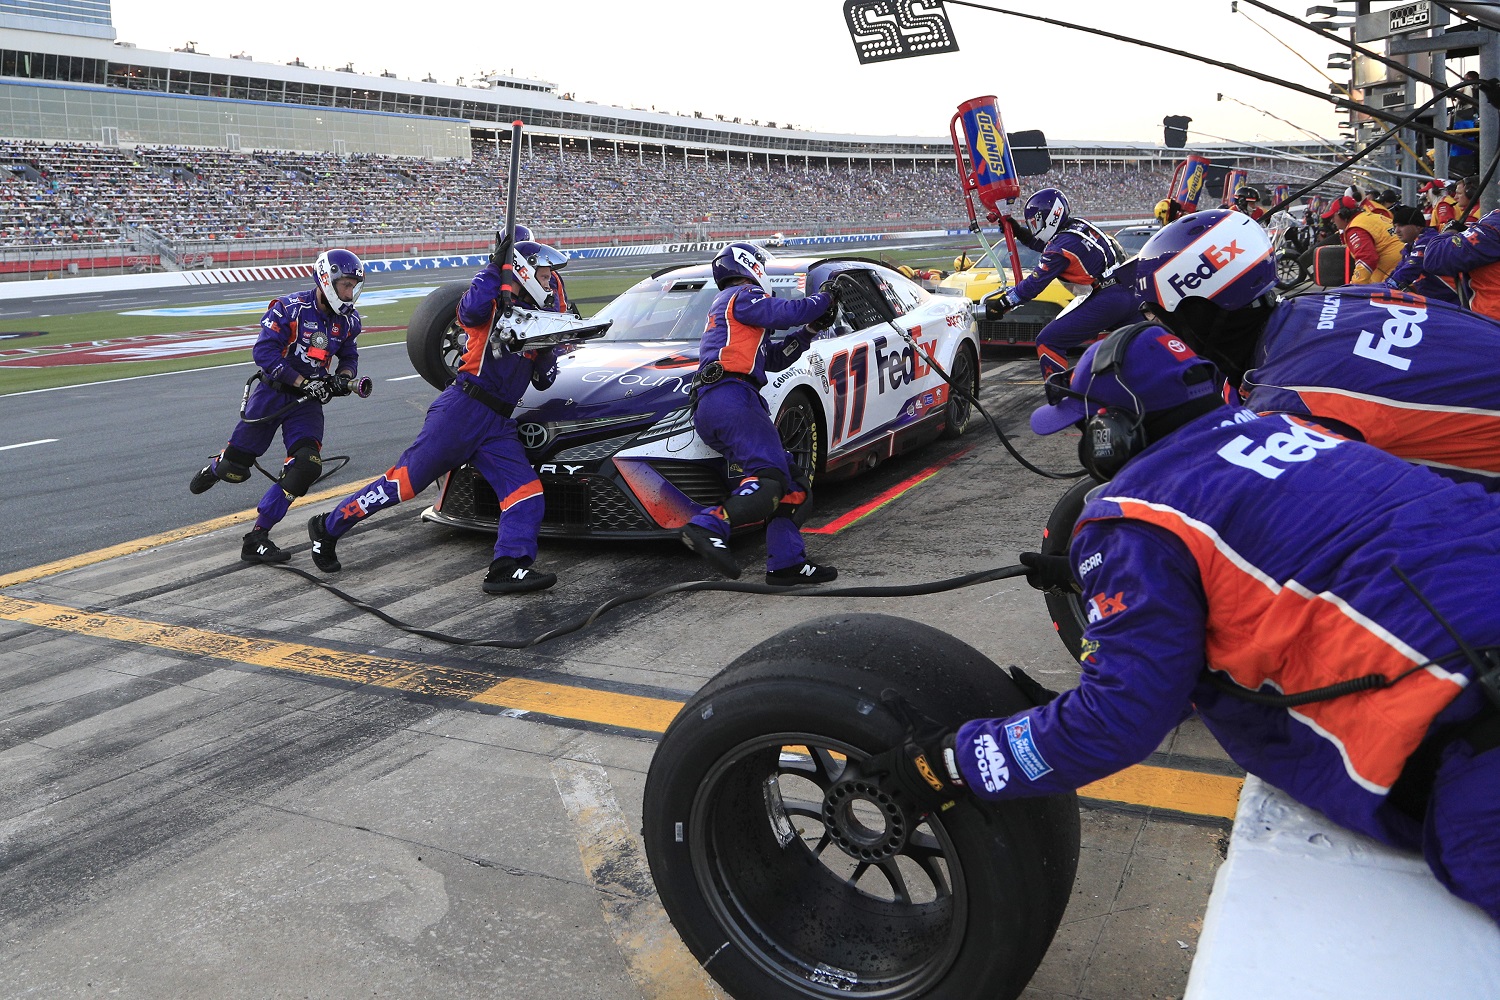 Denny Hamlin makes a pit stop during the running of the NASCAR Cup Series Coca-Cola 600 on May 29, 2022, at Charlotte Motor Speedway. | Jeff Robinson/Icon Sportswire via Getty Images